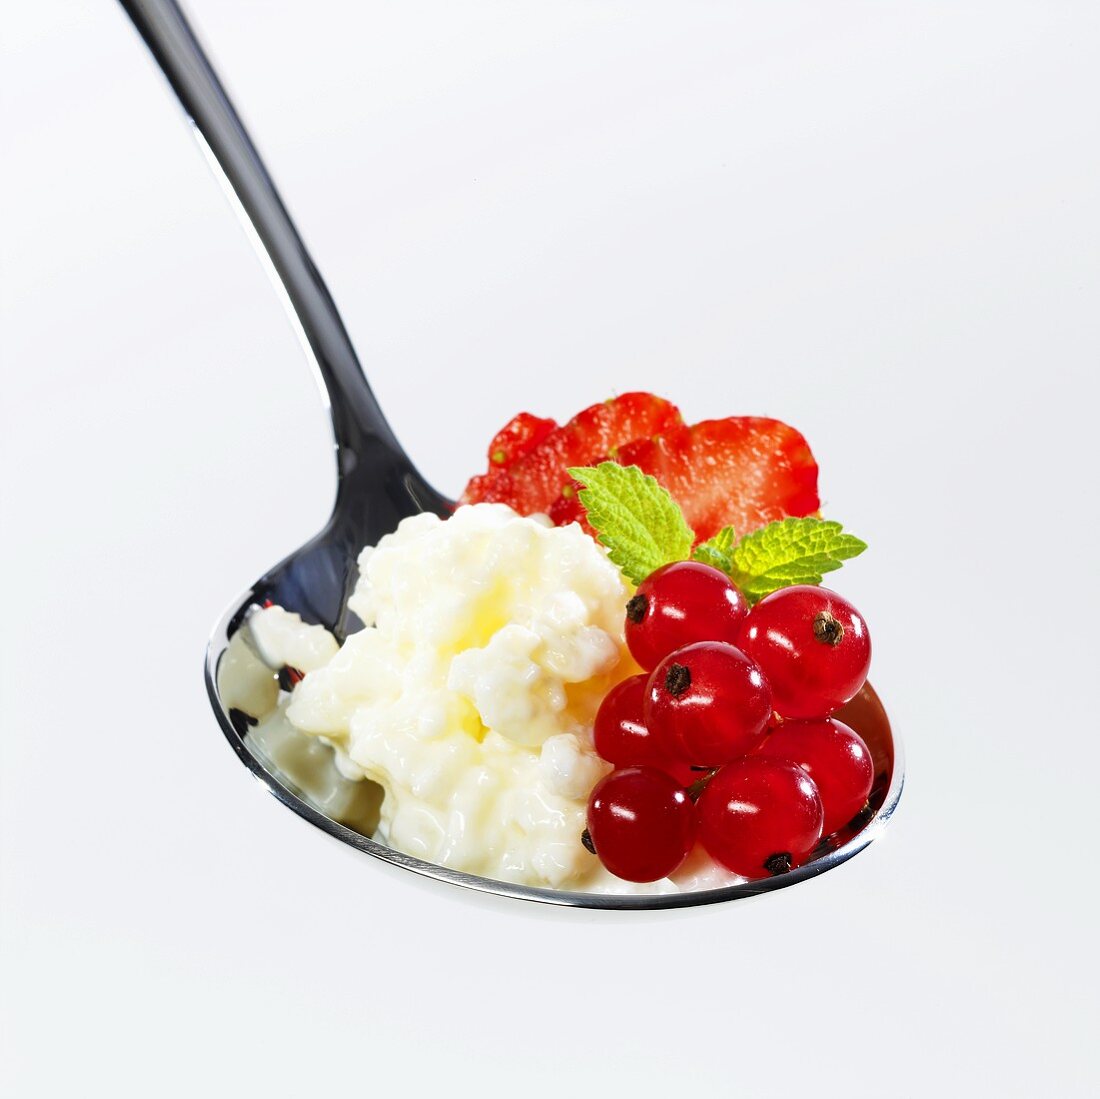 Rice pudding with berries on spoon